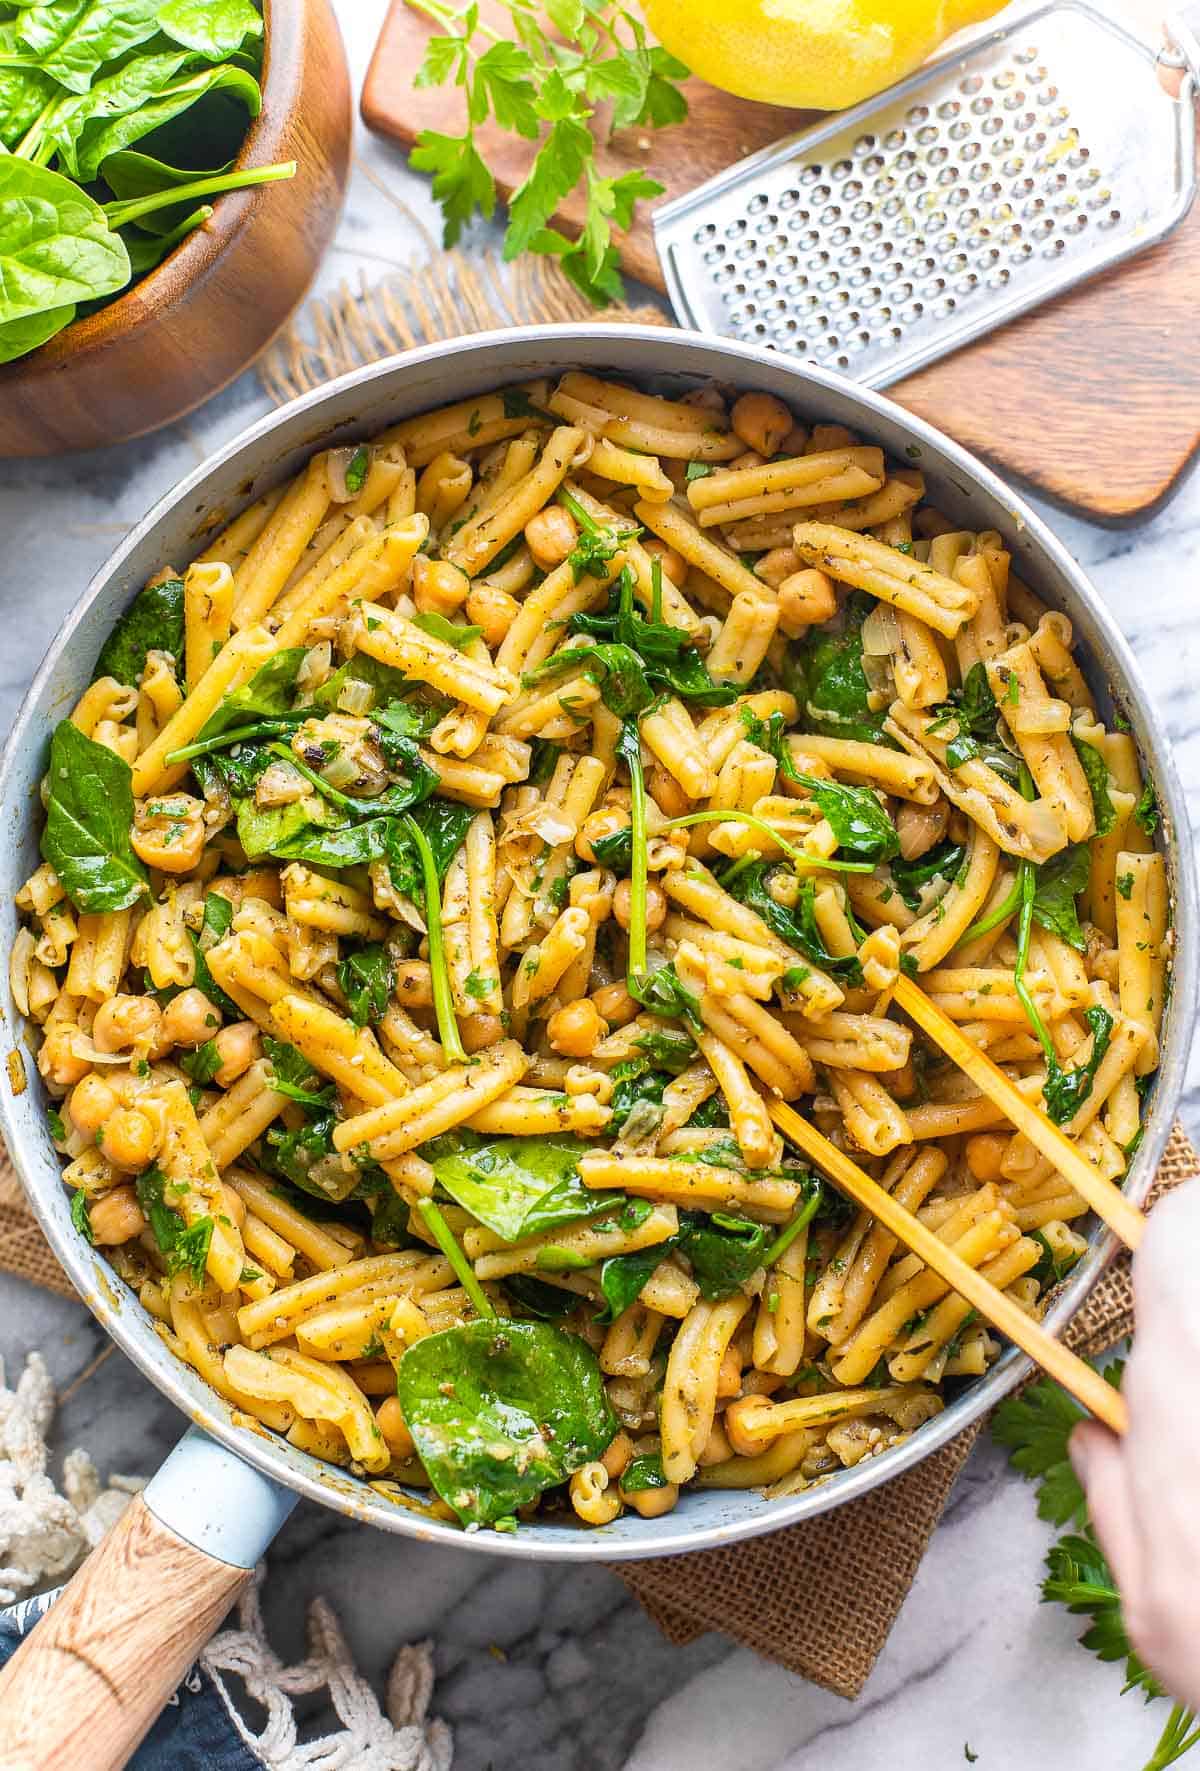 Vegan Miso Pasta with Peas - Cheap And Cheerful Cooking